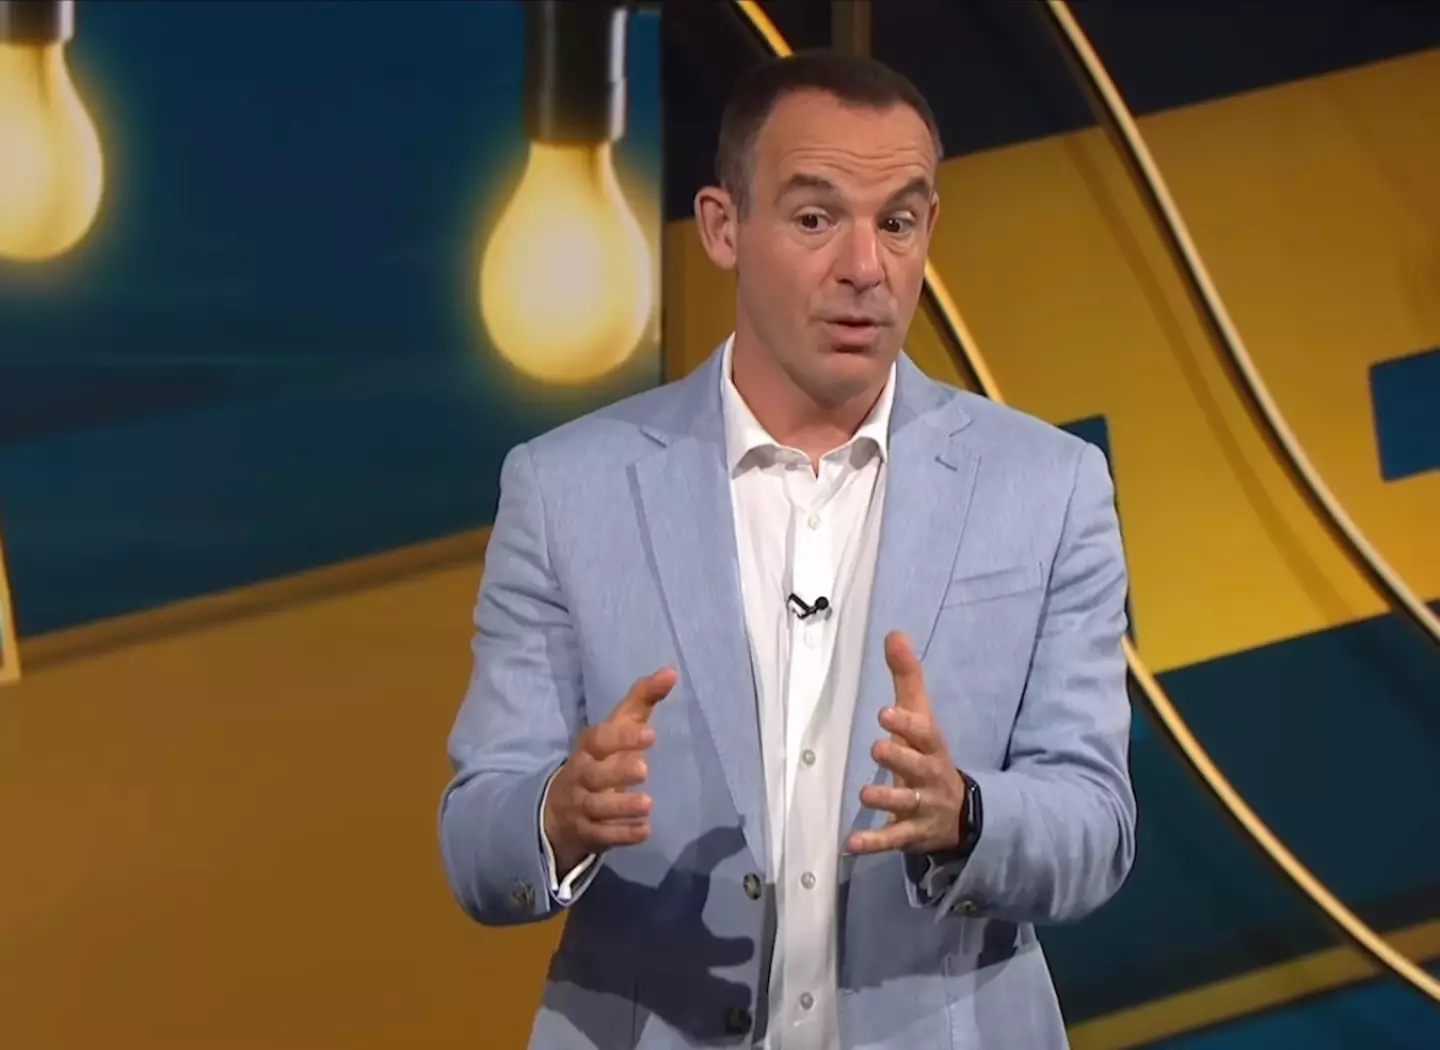 Martin Lewis has explained the concept of 'stoozing'.